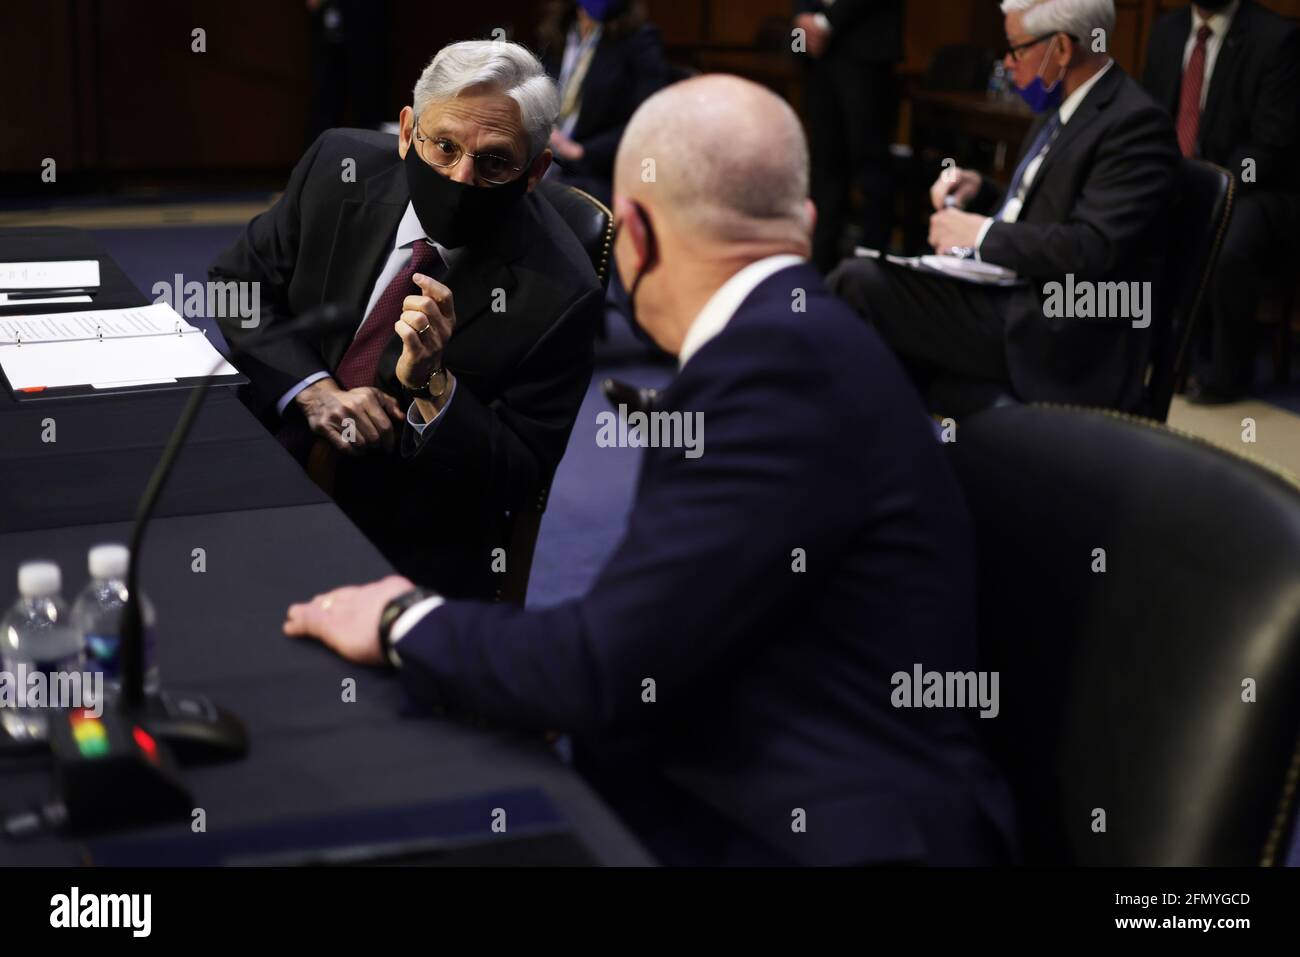 Washington, USA. 12th May, 2021. WASHINGTON, DC - MAY 12: U.S. Attorney General Merrick Garland (L) talks to Homeland Security Secretary Alejandro Mayorkas (R) prior to a hearing before the Senate Appropriations Committee at Hart Senate Office Building on May 12, 2021 on Capitol Hill in Washington, DC. The committee held a hearing on “Domestic Violent Extremism in America.” (Photo by Alex Wong/Pool/Sipa USA) Credit: Sipa USA/Alamy Live News Stock Photo